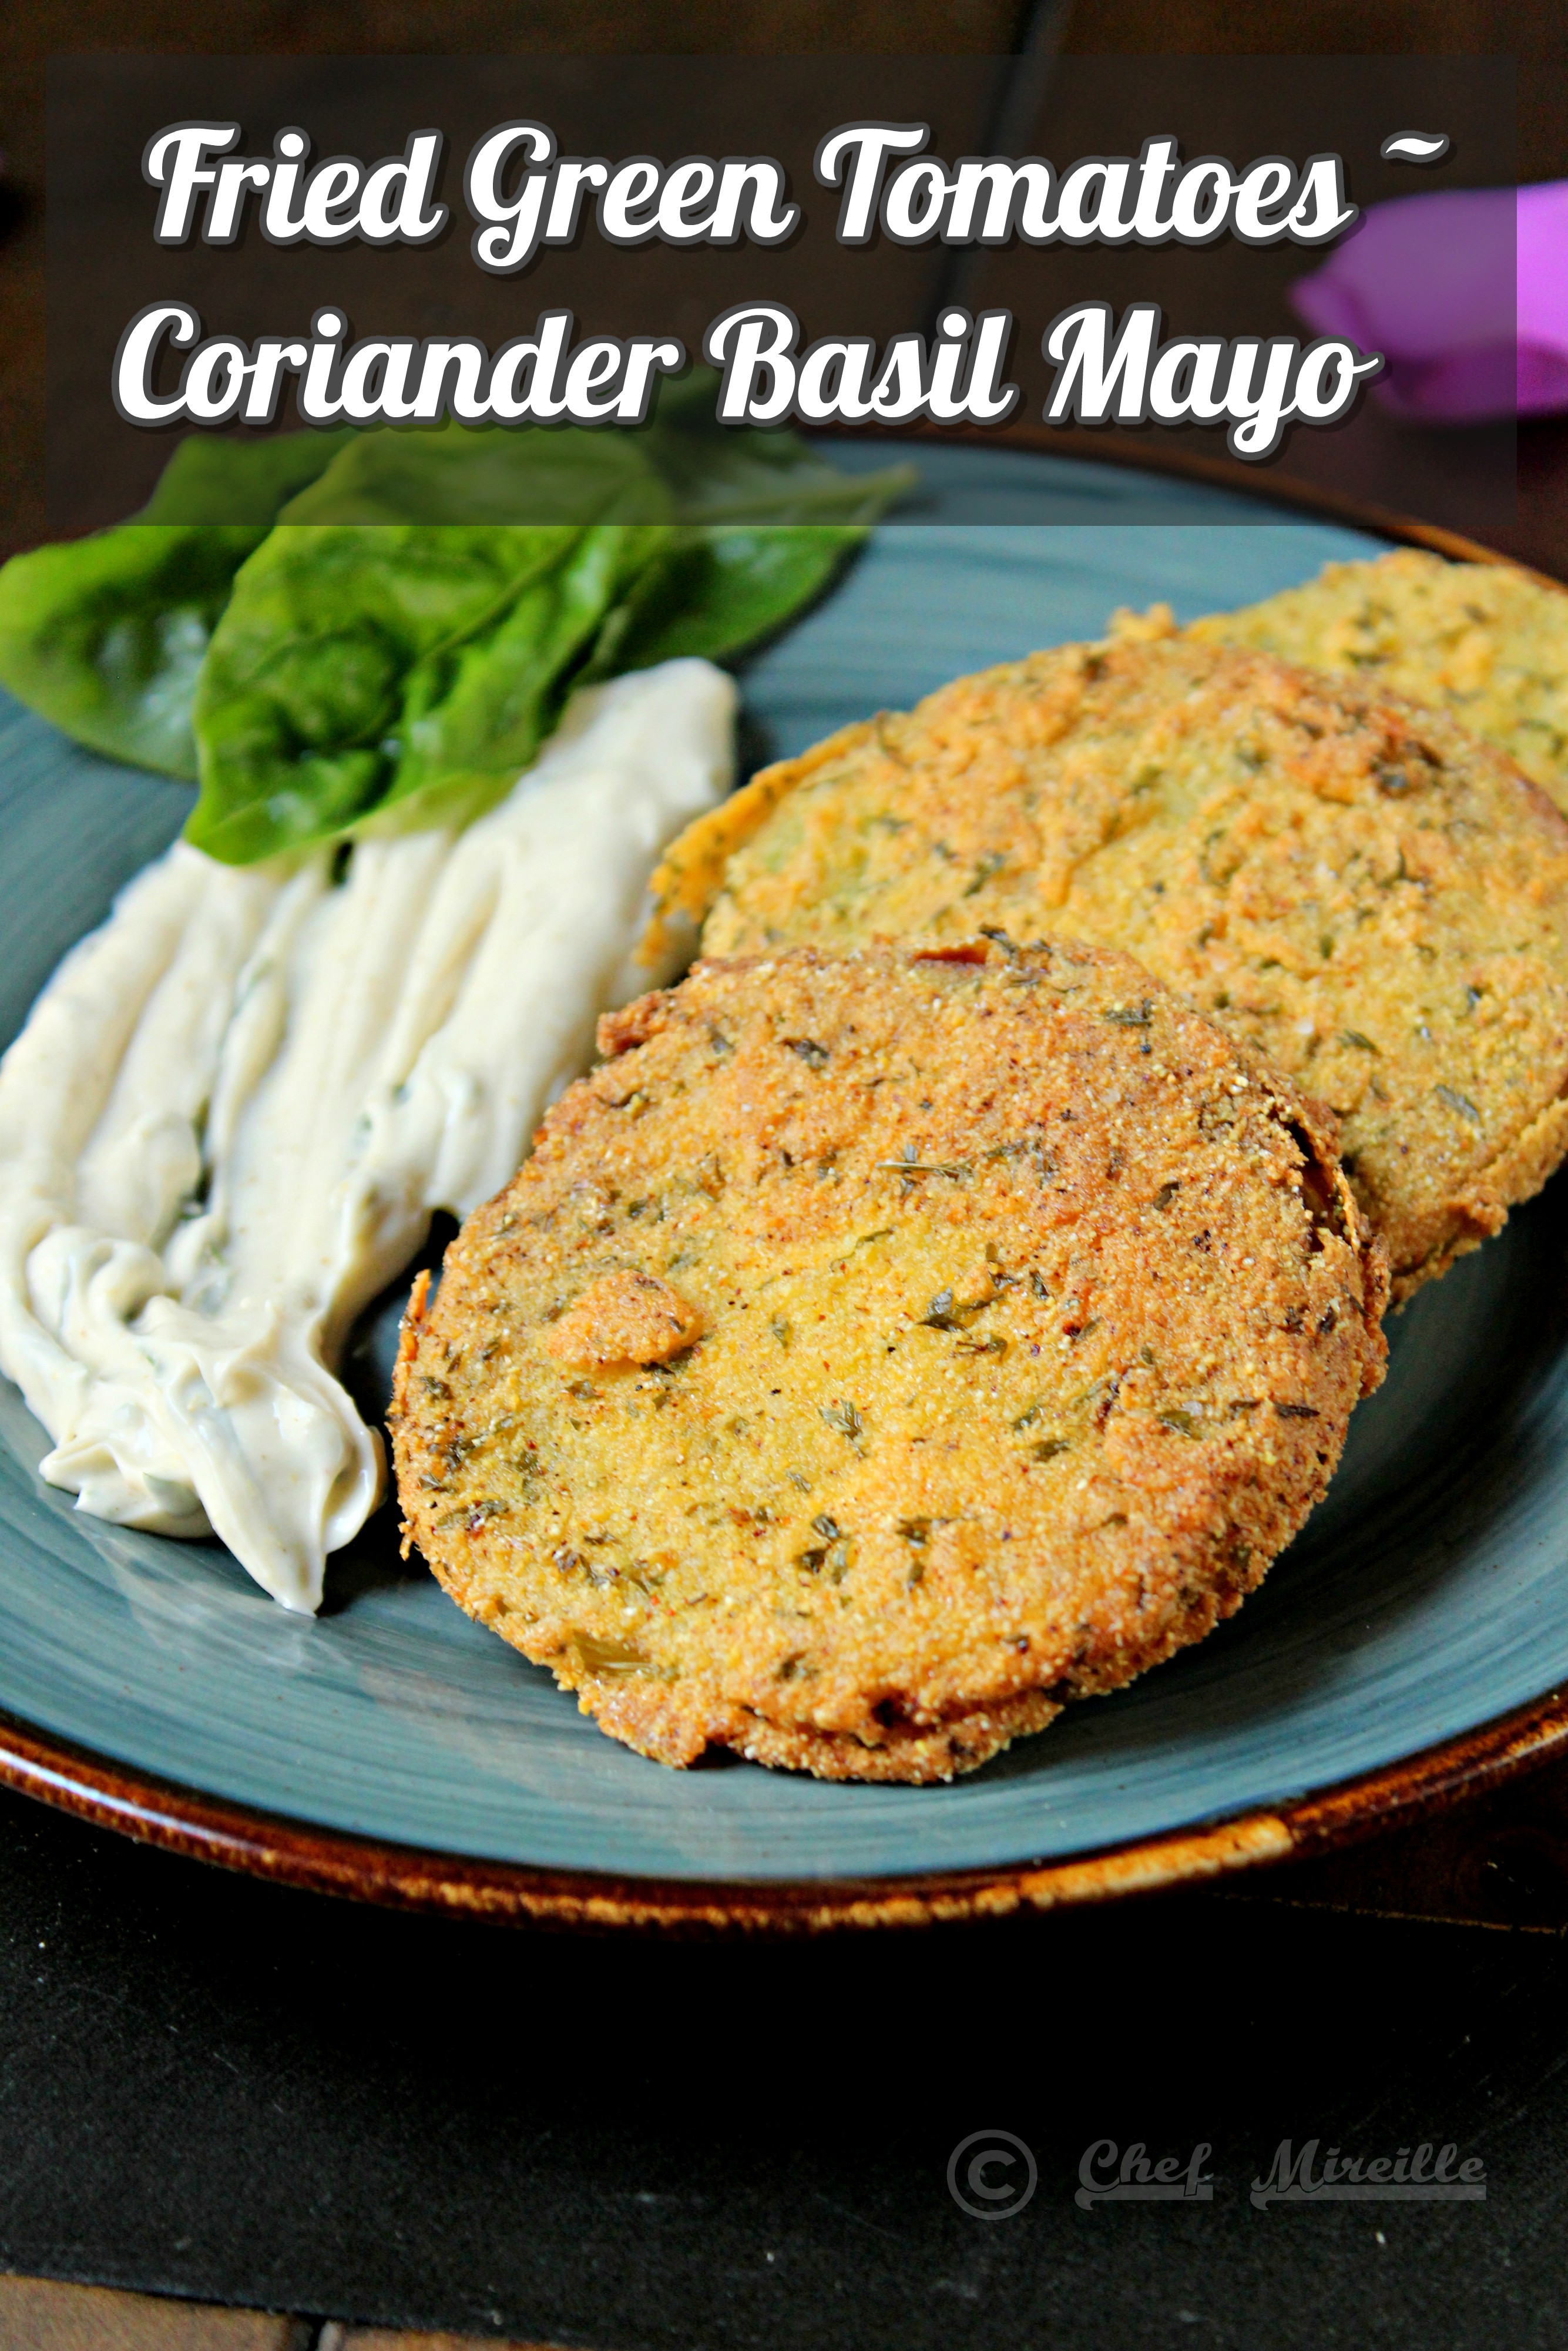 Fried Green Tomatoes with Coriander Basil Mayo